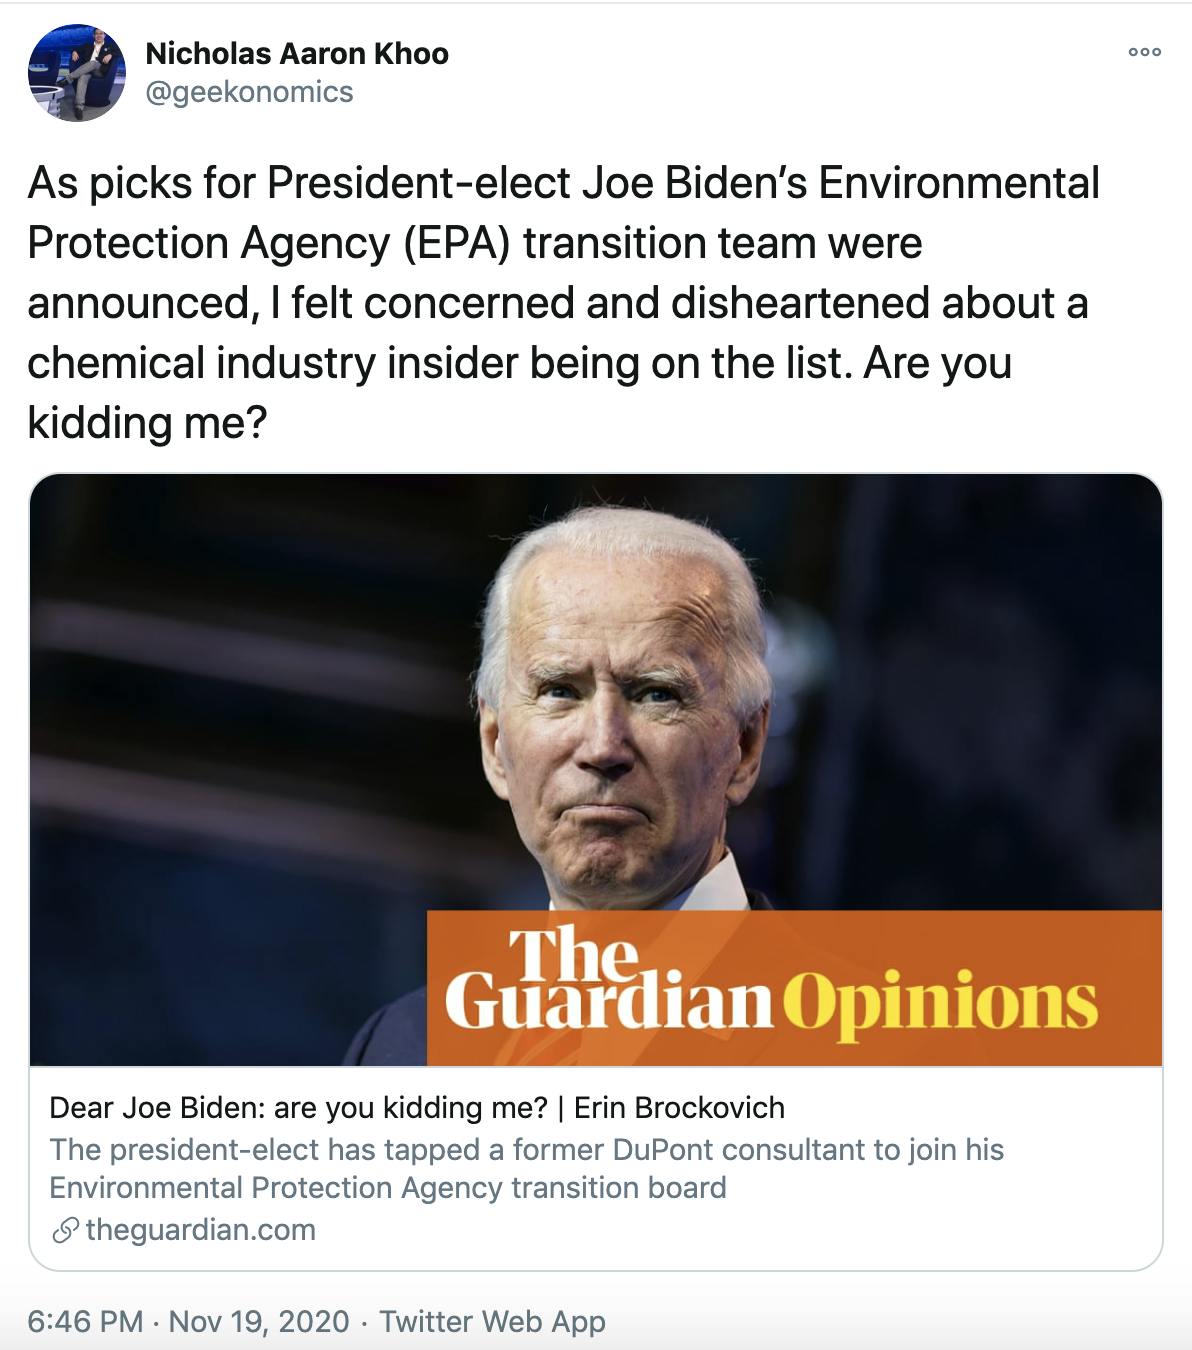 As picks for President-elect Joe Biden’s Environmental Protection Agency (EPA) transition team were announced, I felt concerned and disheartened about a chemical industry insider being on the list. Are you kidding me?